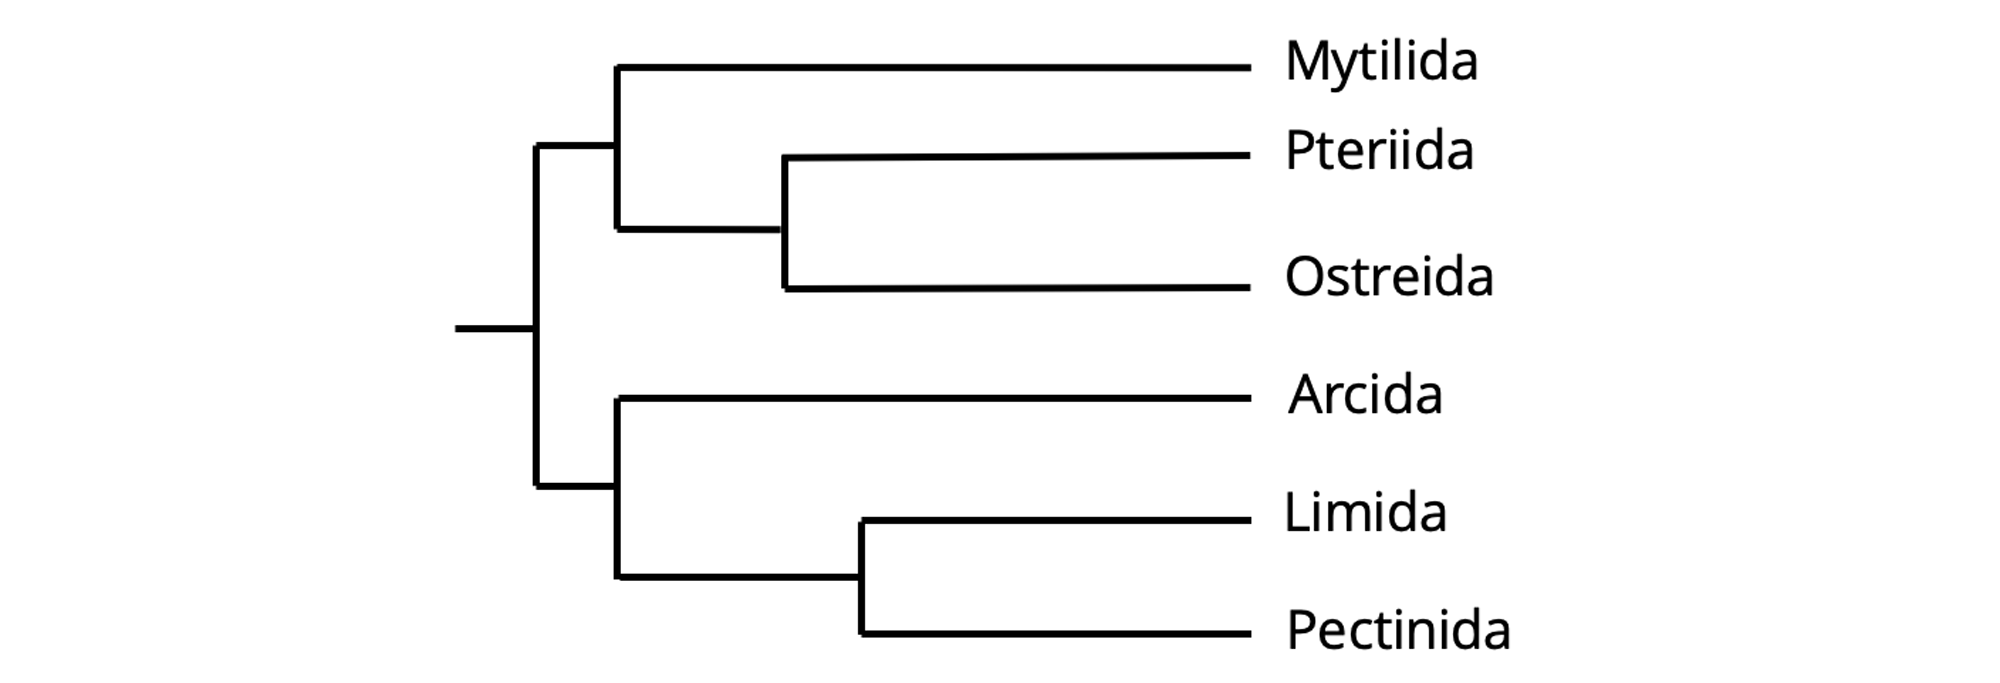 Image showing the phylogeny of pteriomorph bivalves.